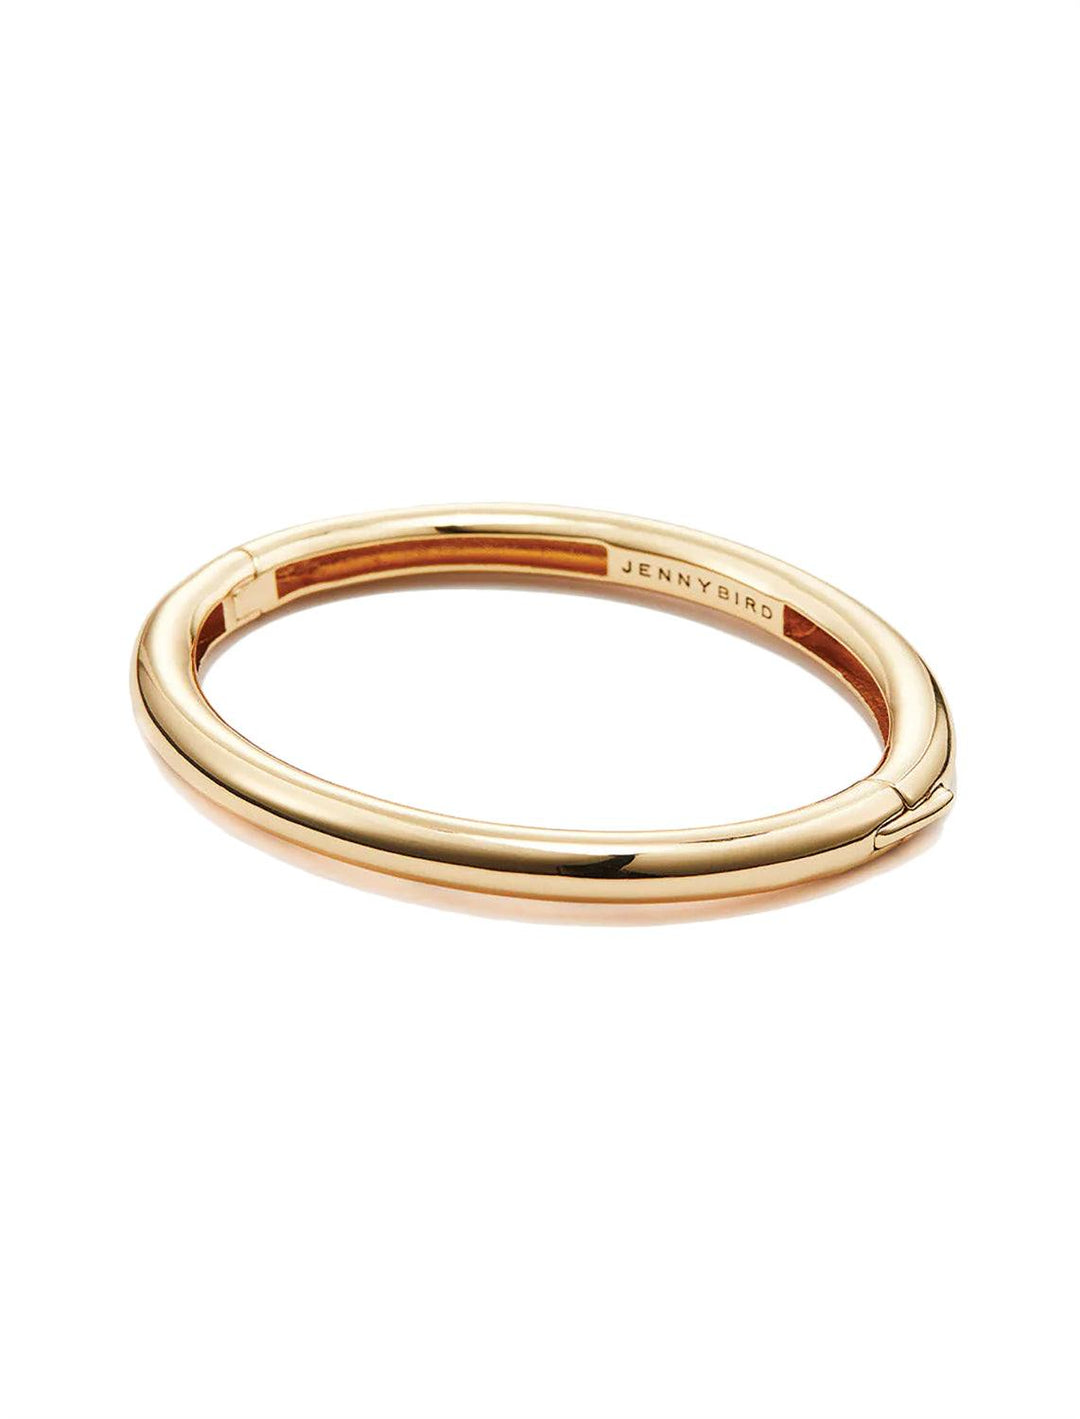 Front angle view of Jenny Bird's Gia Bangle in Gold Tone Dipped Brass.